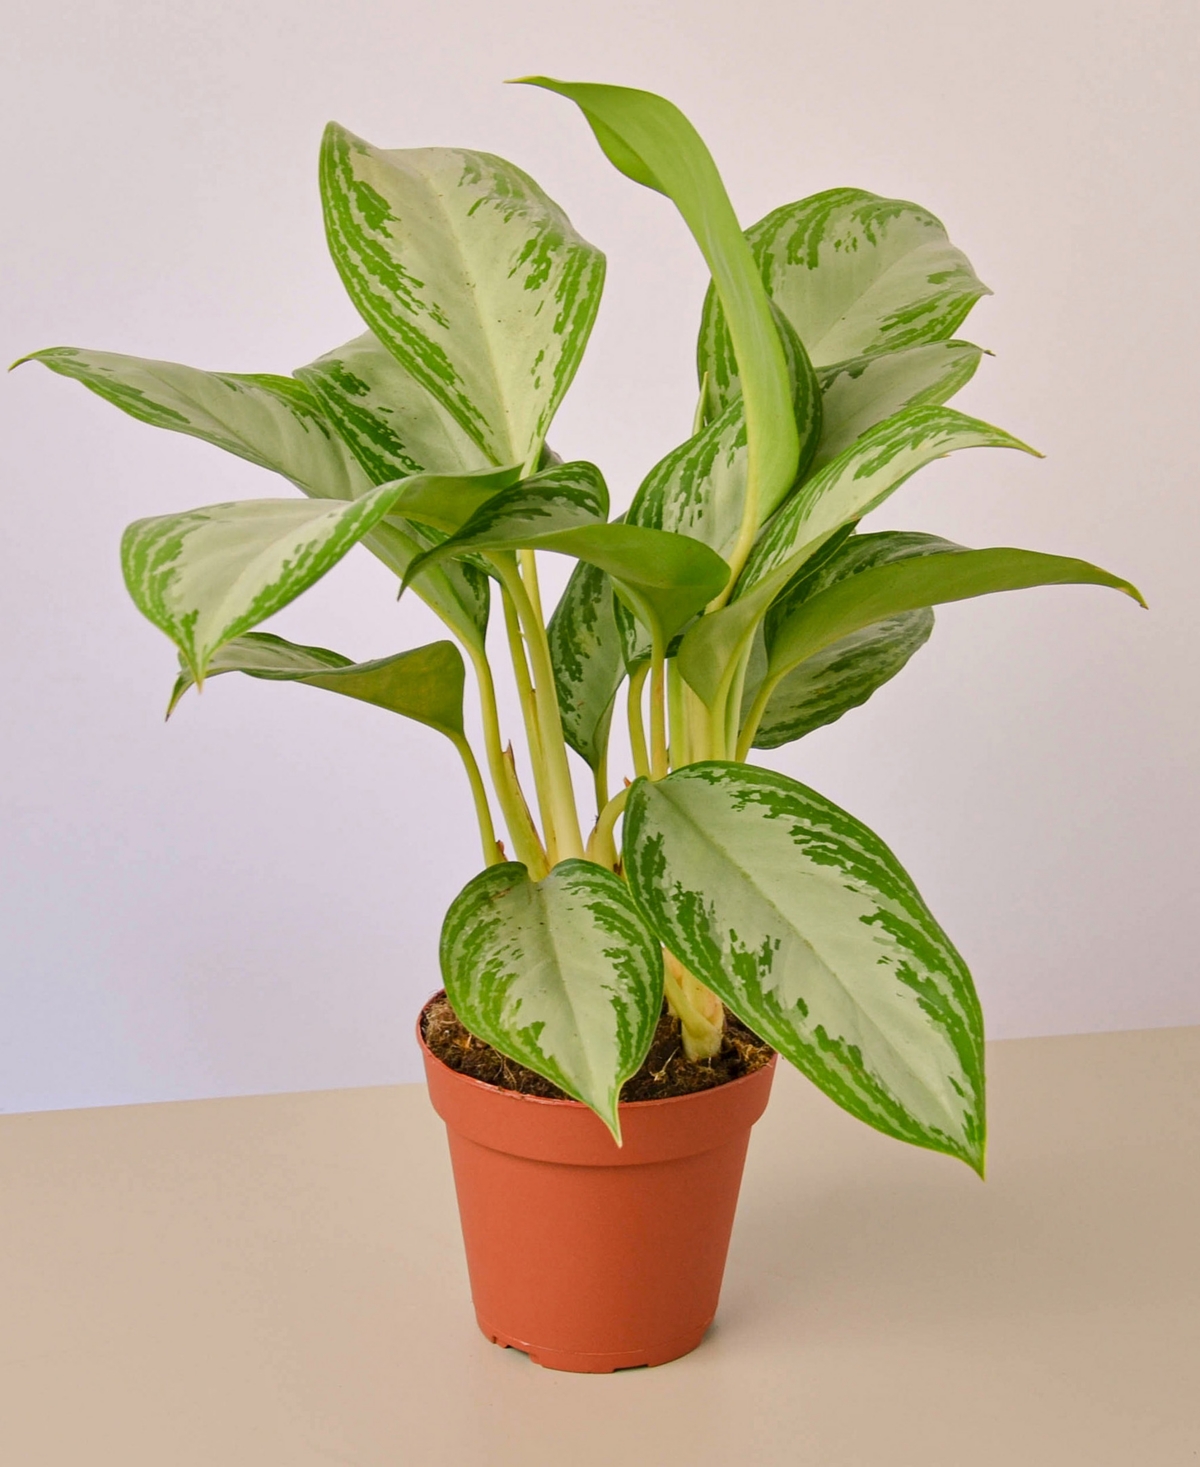 Chinese Evergreen Silver Bay Live Plant, 4" Pot